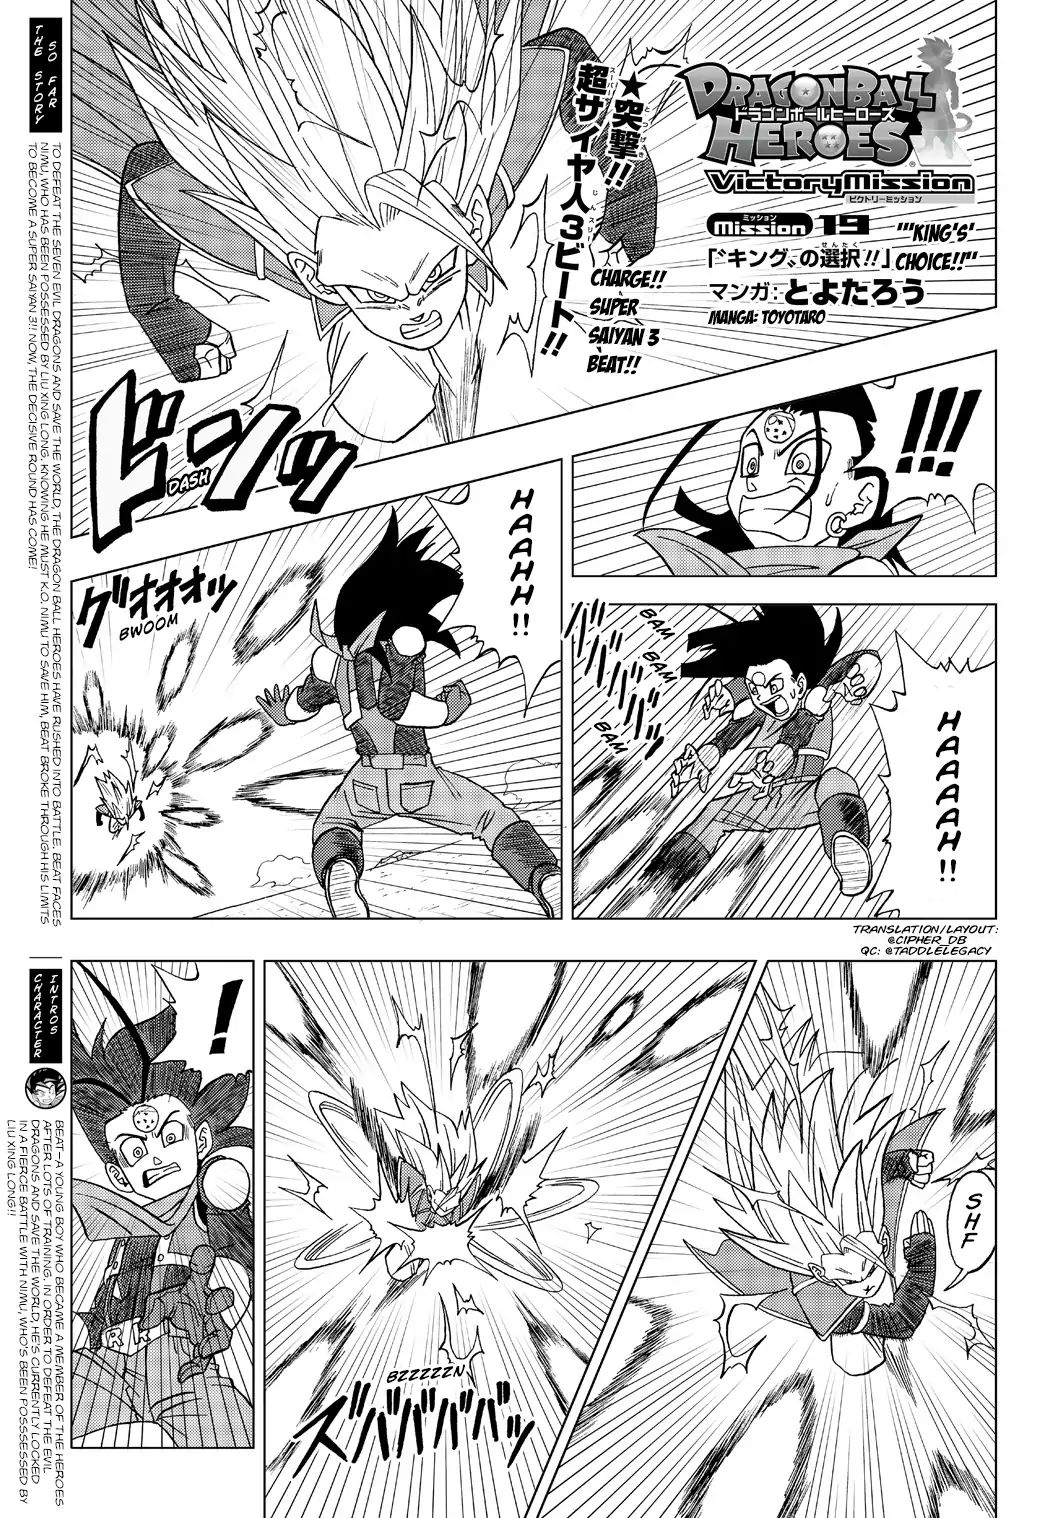 Dragon Ball Heroes - Victory Mission - chapter 19 - #1